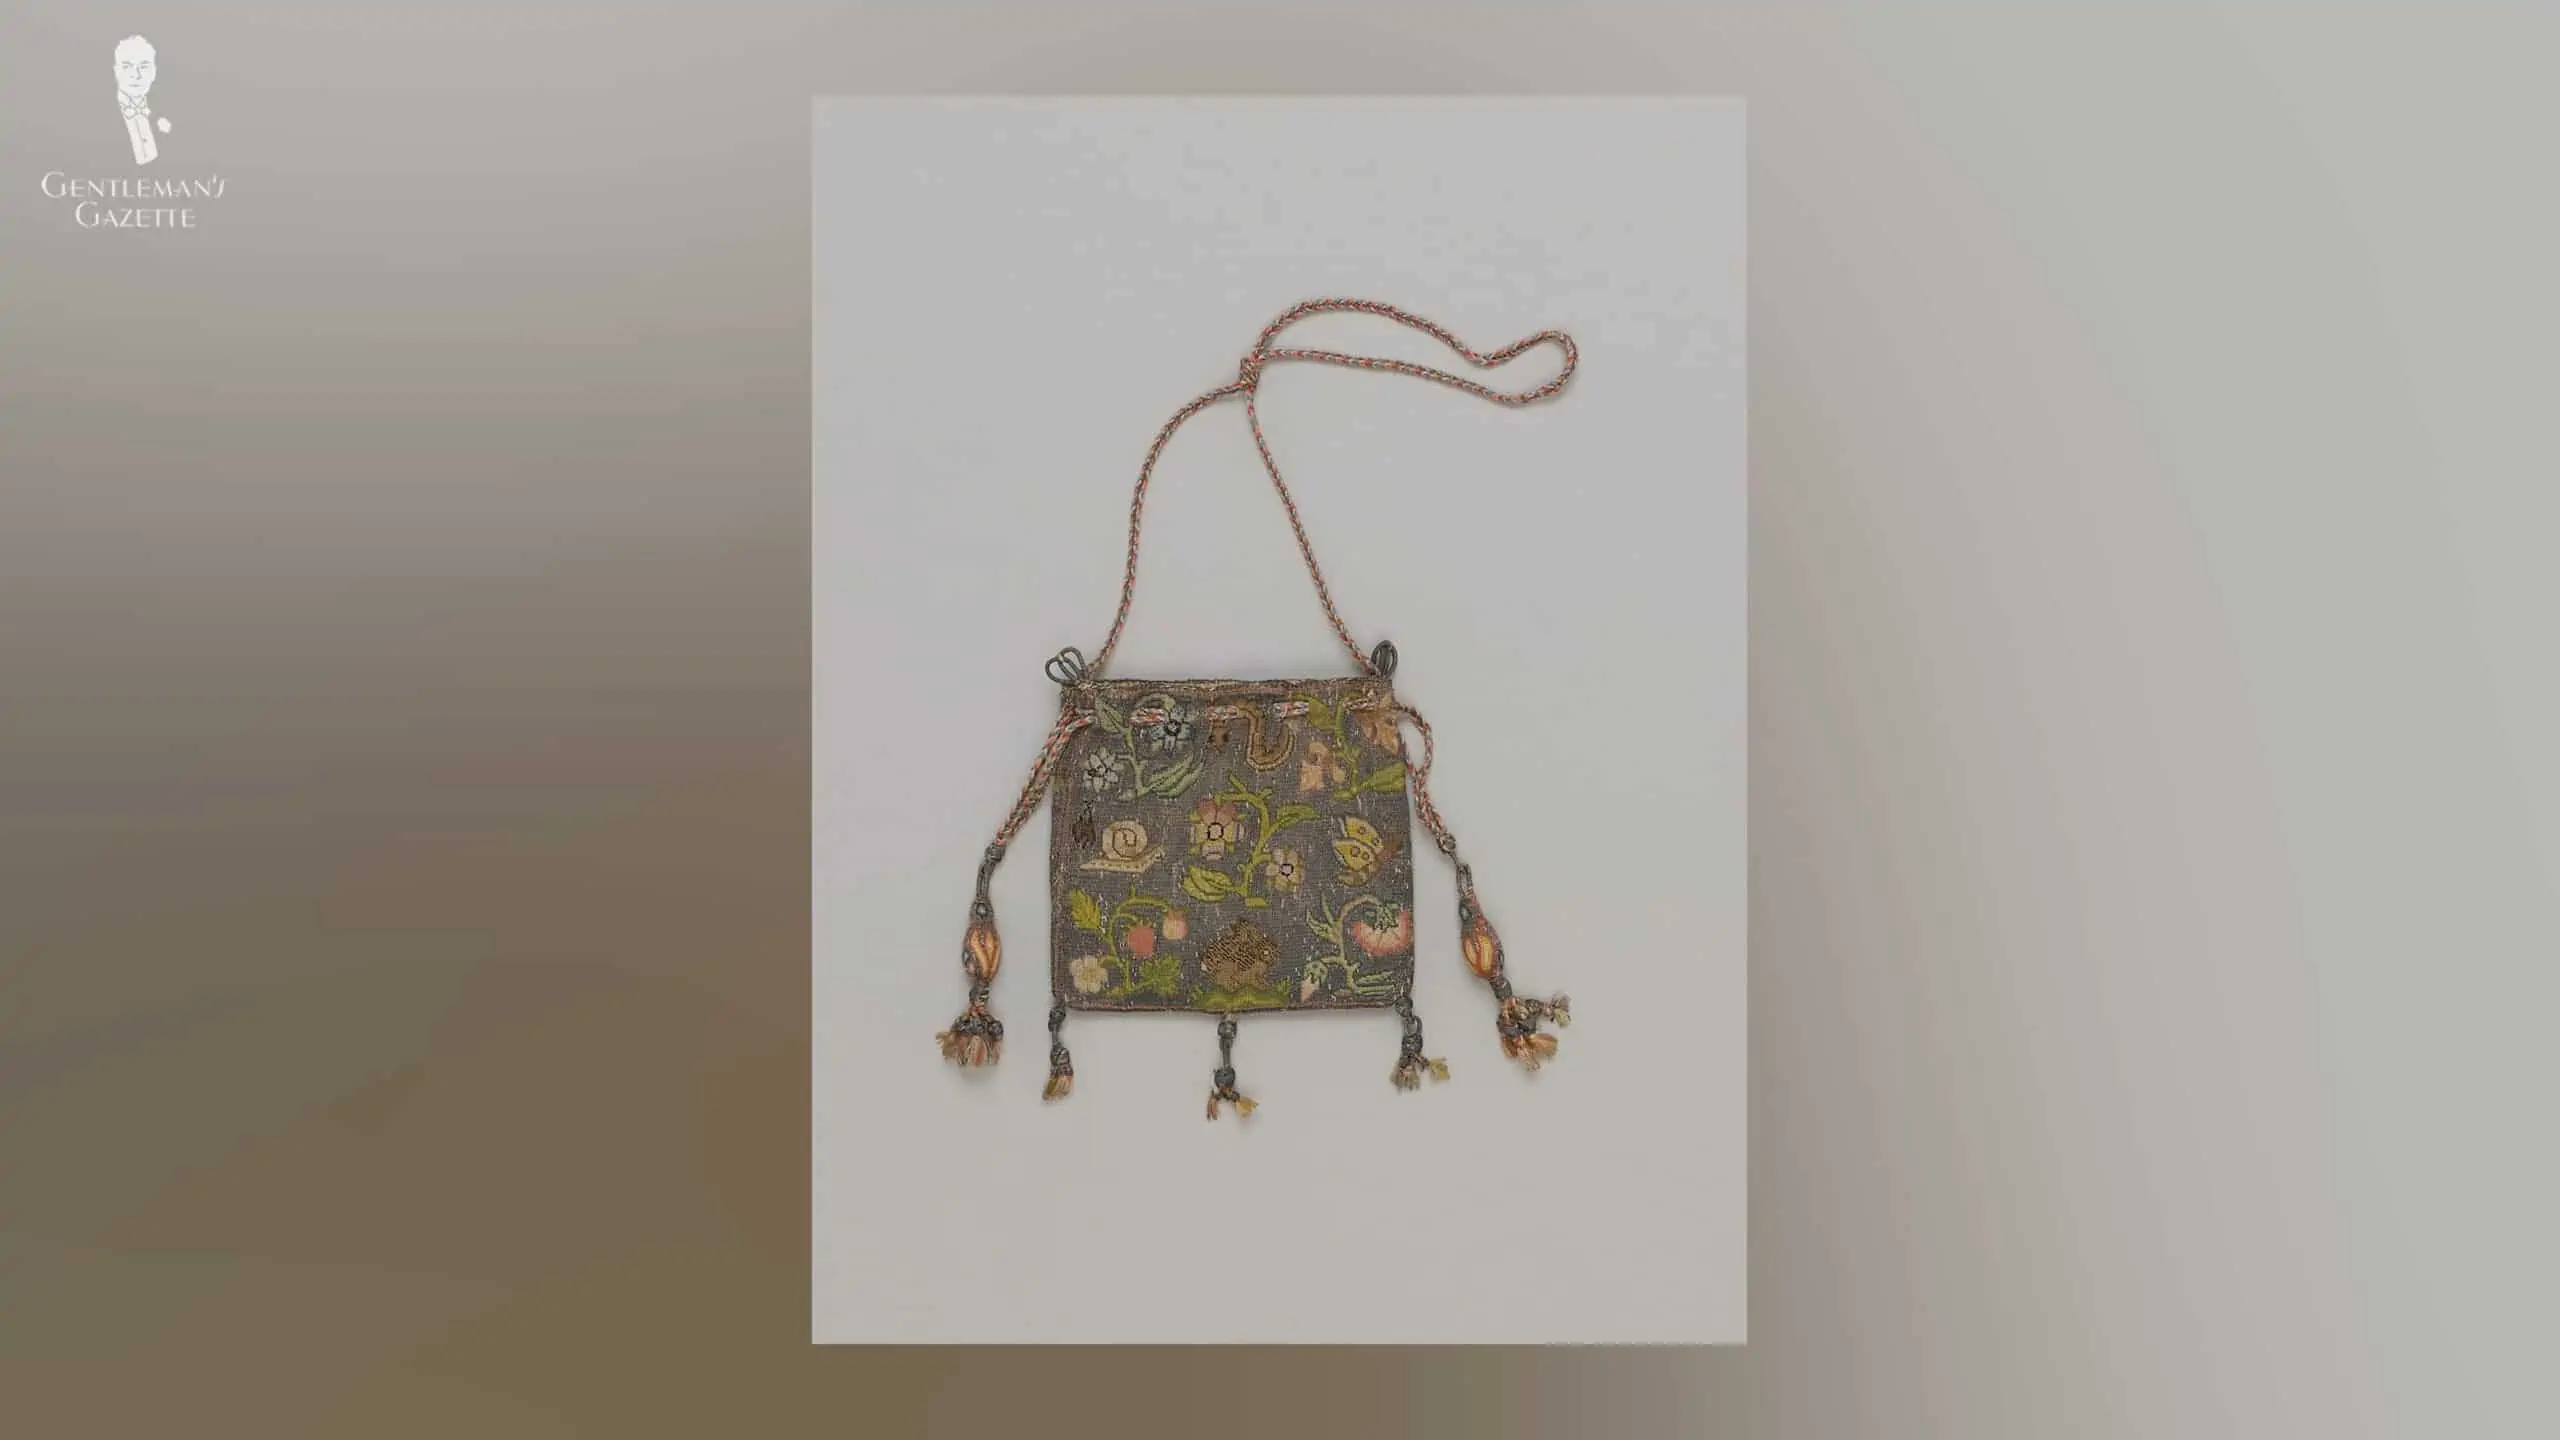 A bag designed with an intricate design and embroidery